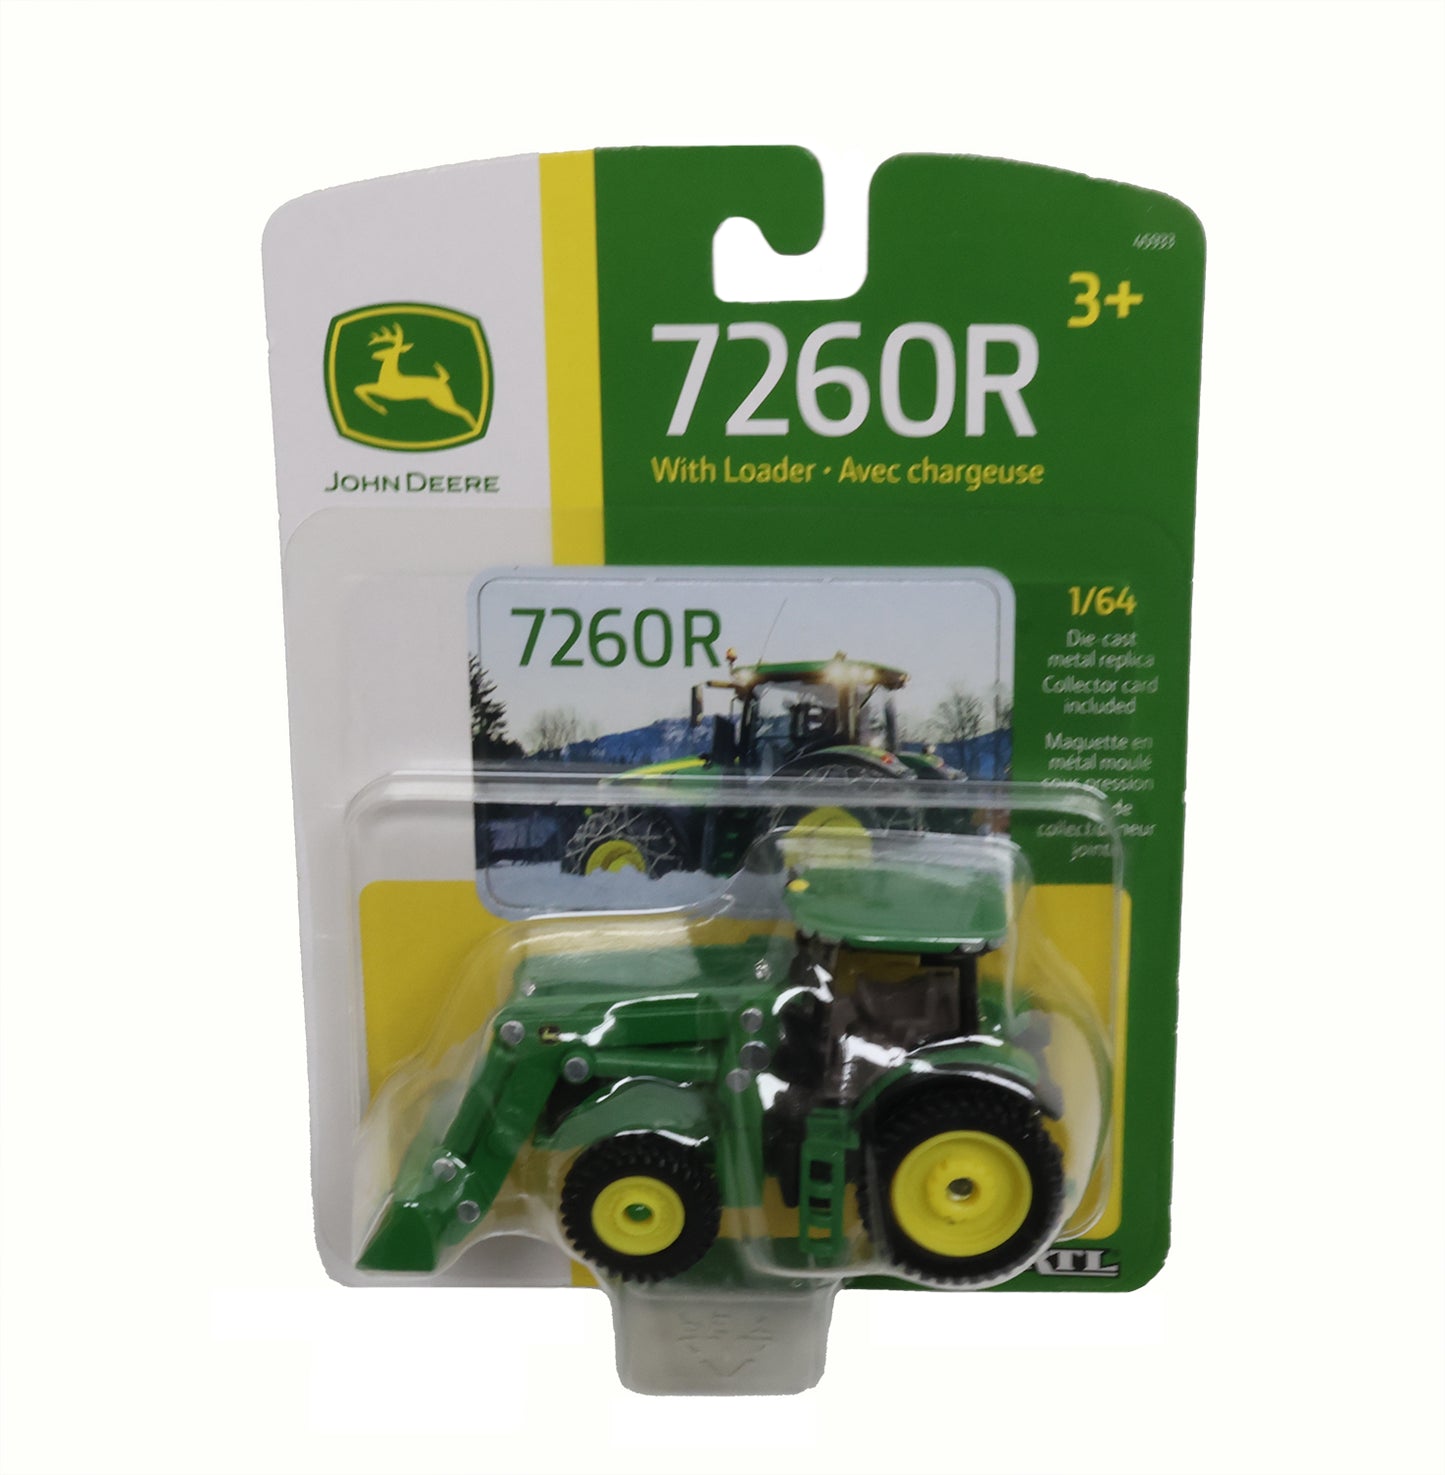 1/64 John Deere 7260R Tractor with Loader Toy - LP84533